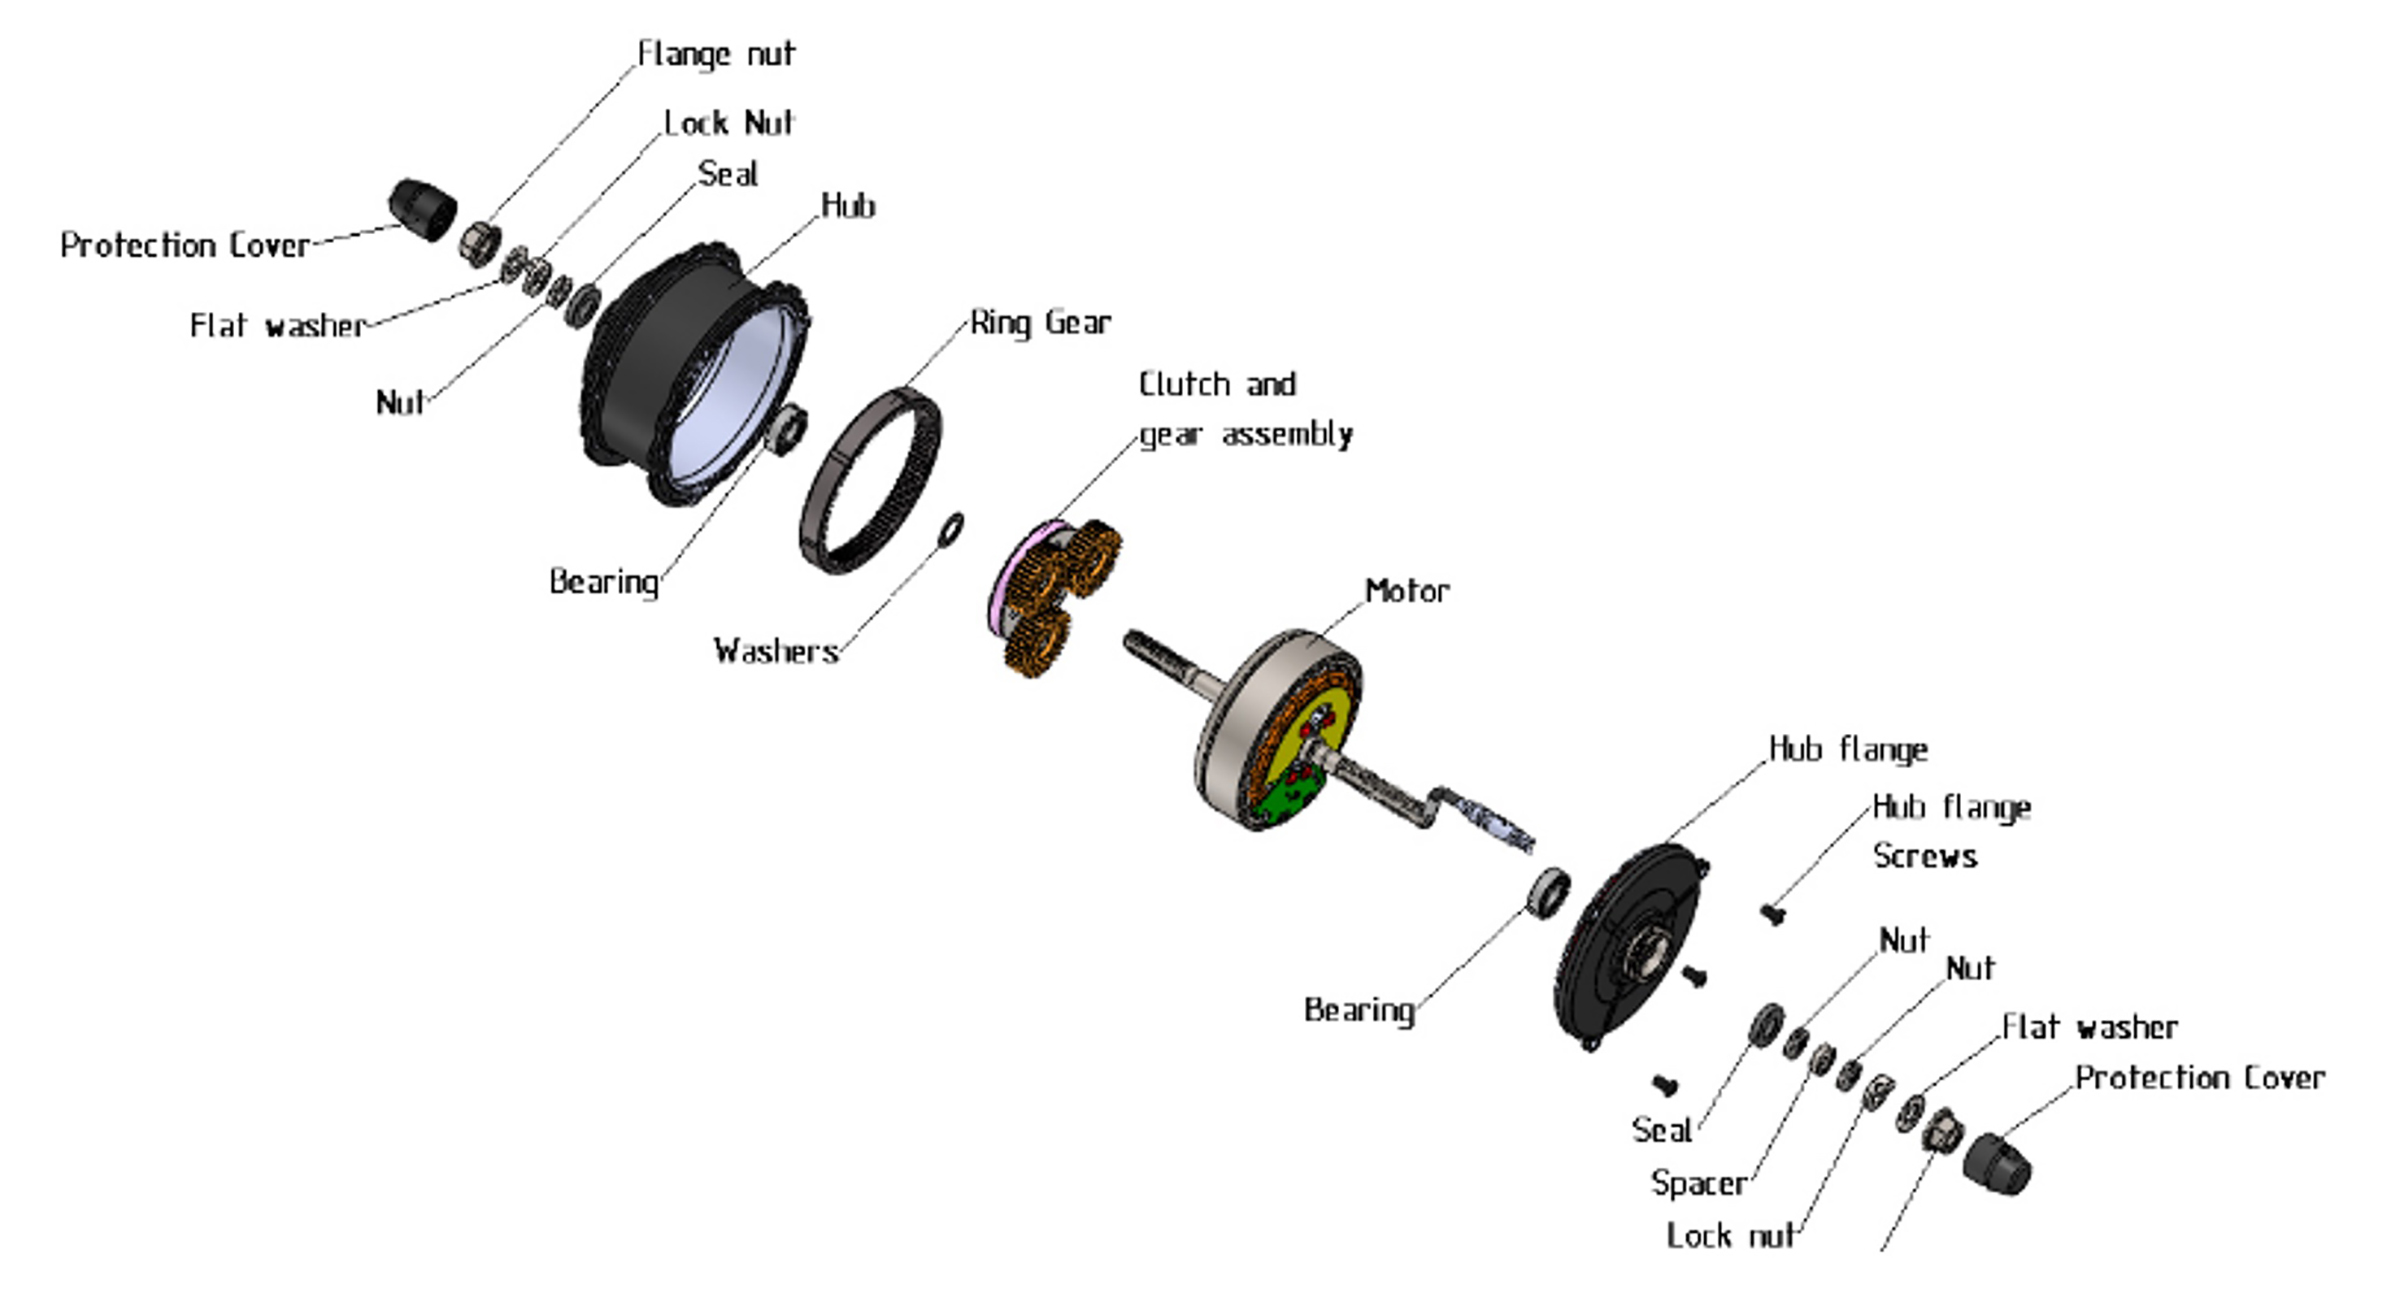 Figure 4: Exploded view of hub motor internal components.